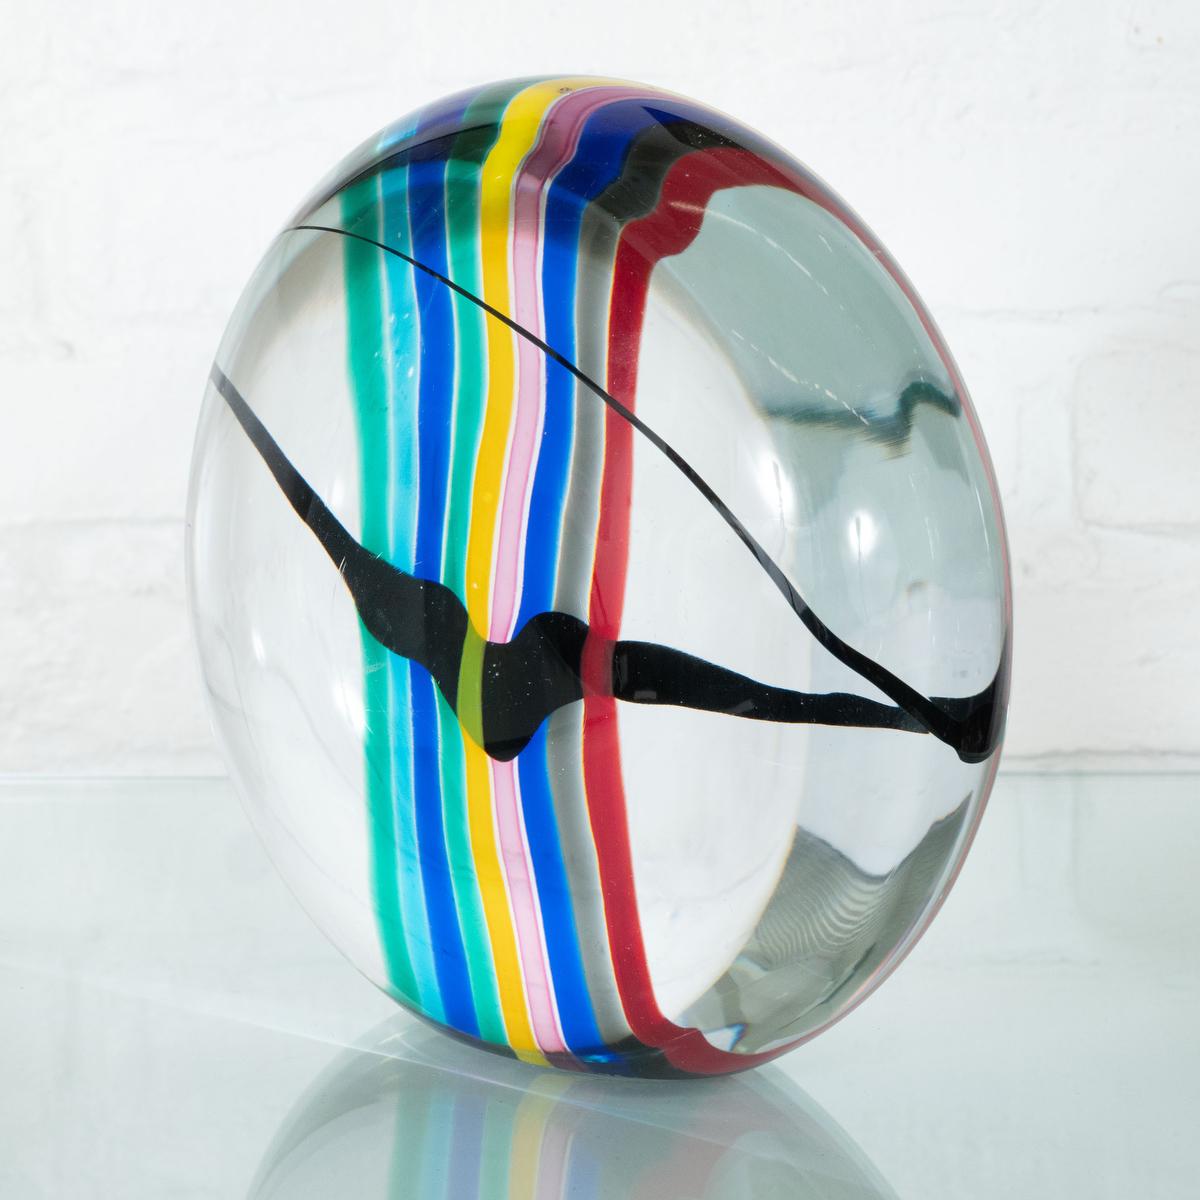 Mid-20th Century Colorful Sommerso Murano Glass Sculpture For Sale